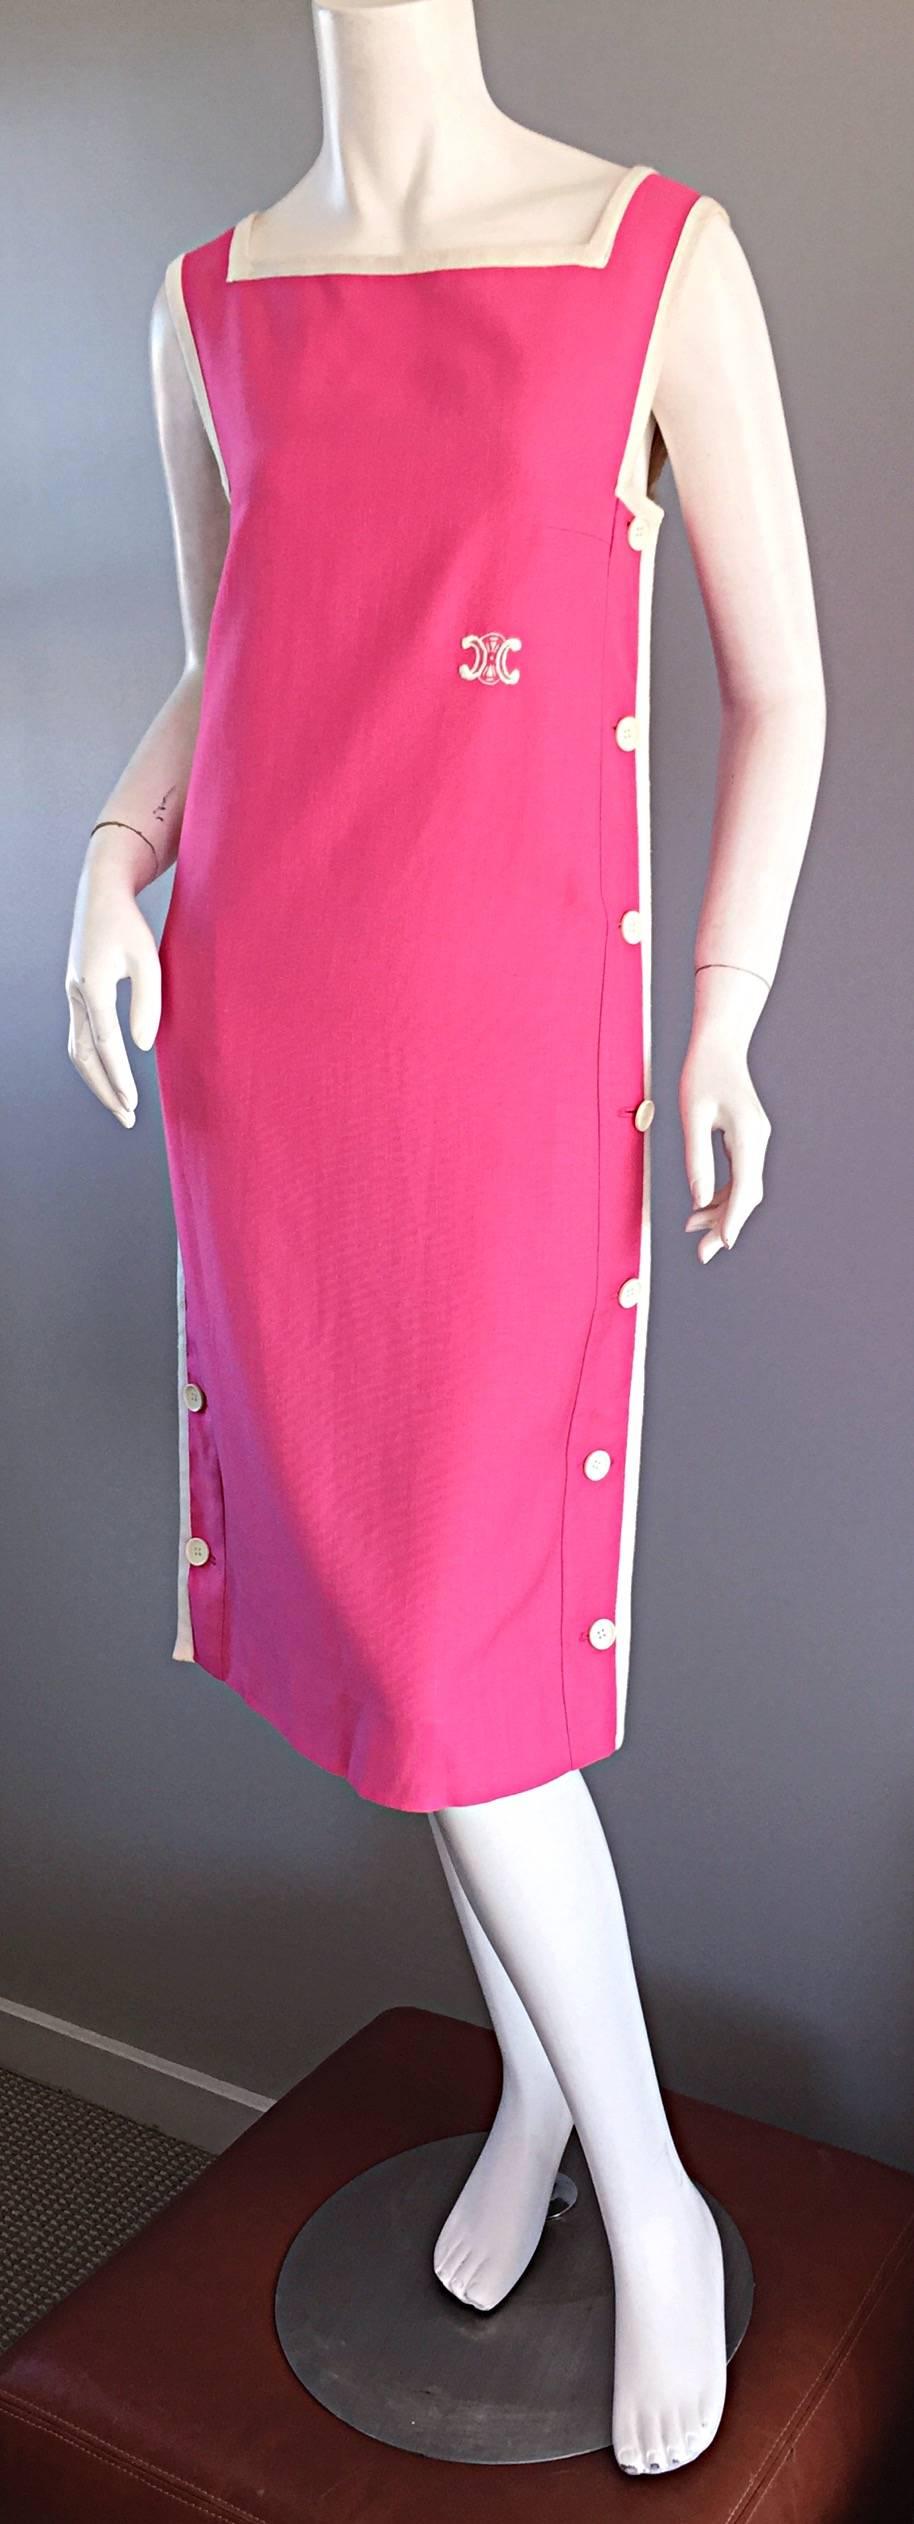 Chic AND Rare vintage Celine dress from the mid 1960s. Celine began in 1945 as a high end shoemaker for children. In 1960, the transitioned to leather goods, shoes, and ready to wear. This dress was from one of the first ready to wear lines. 
Nice